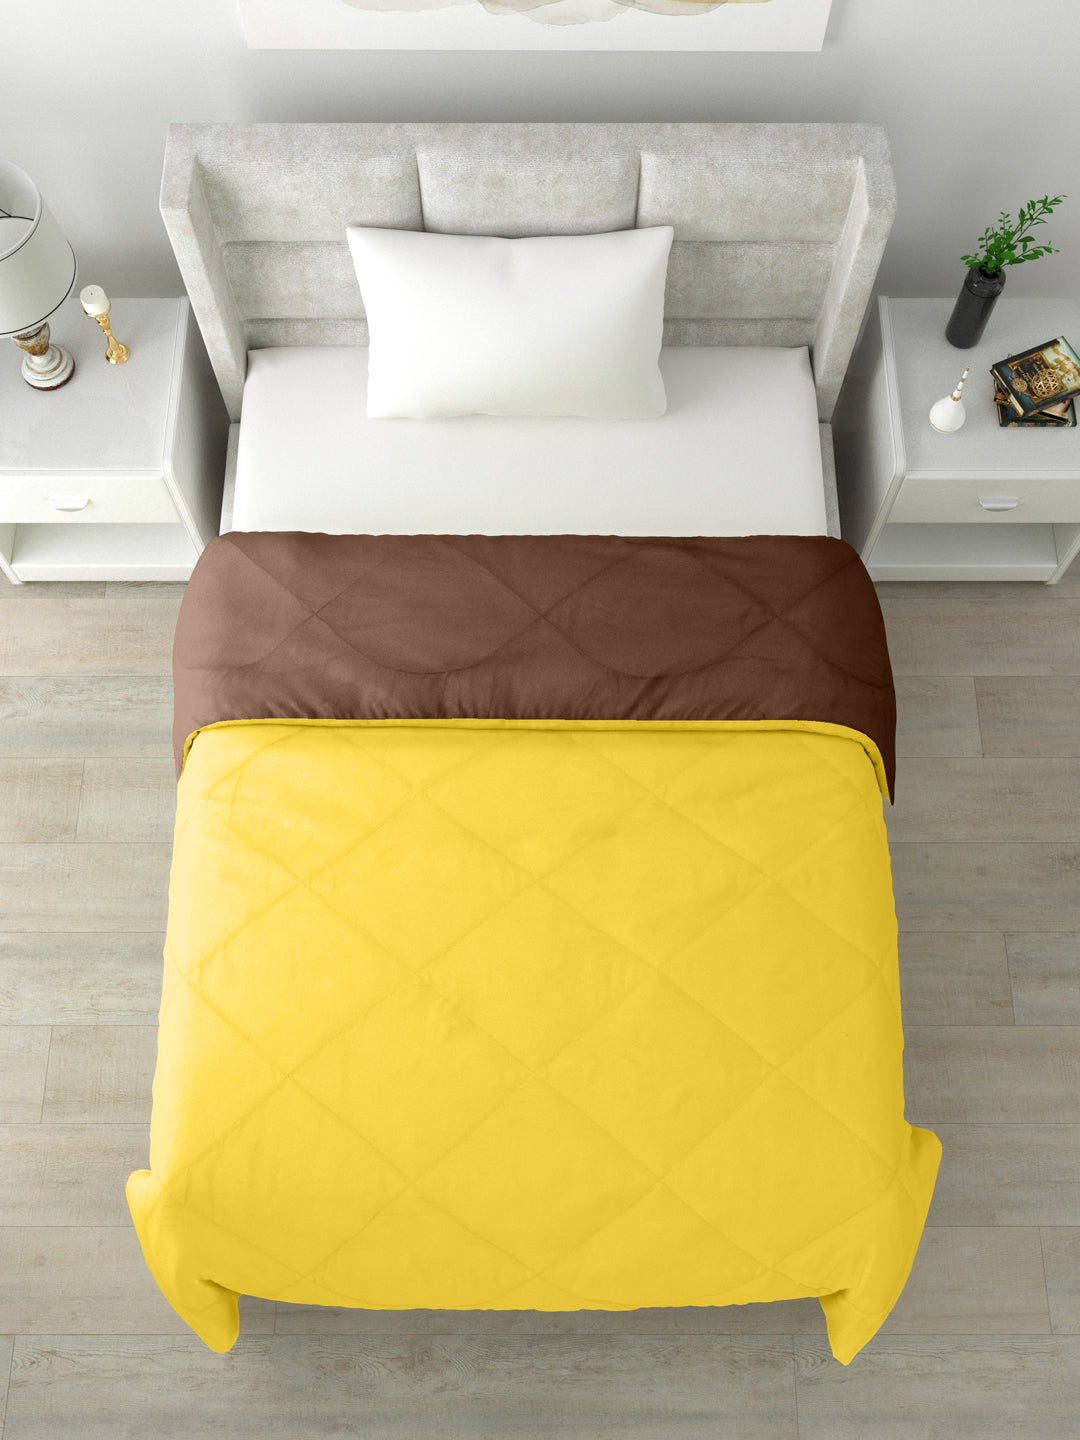 Reversible Single Bed Comforter 200 GSM 60x90 Inches (Brown & Yellow)